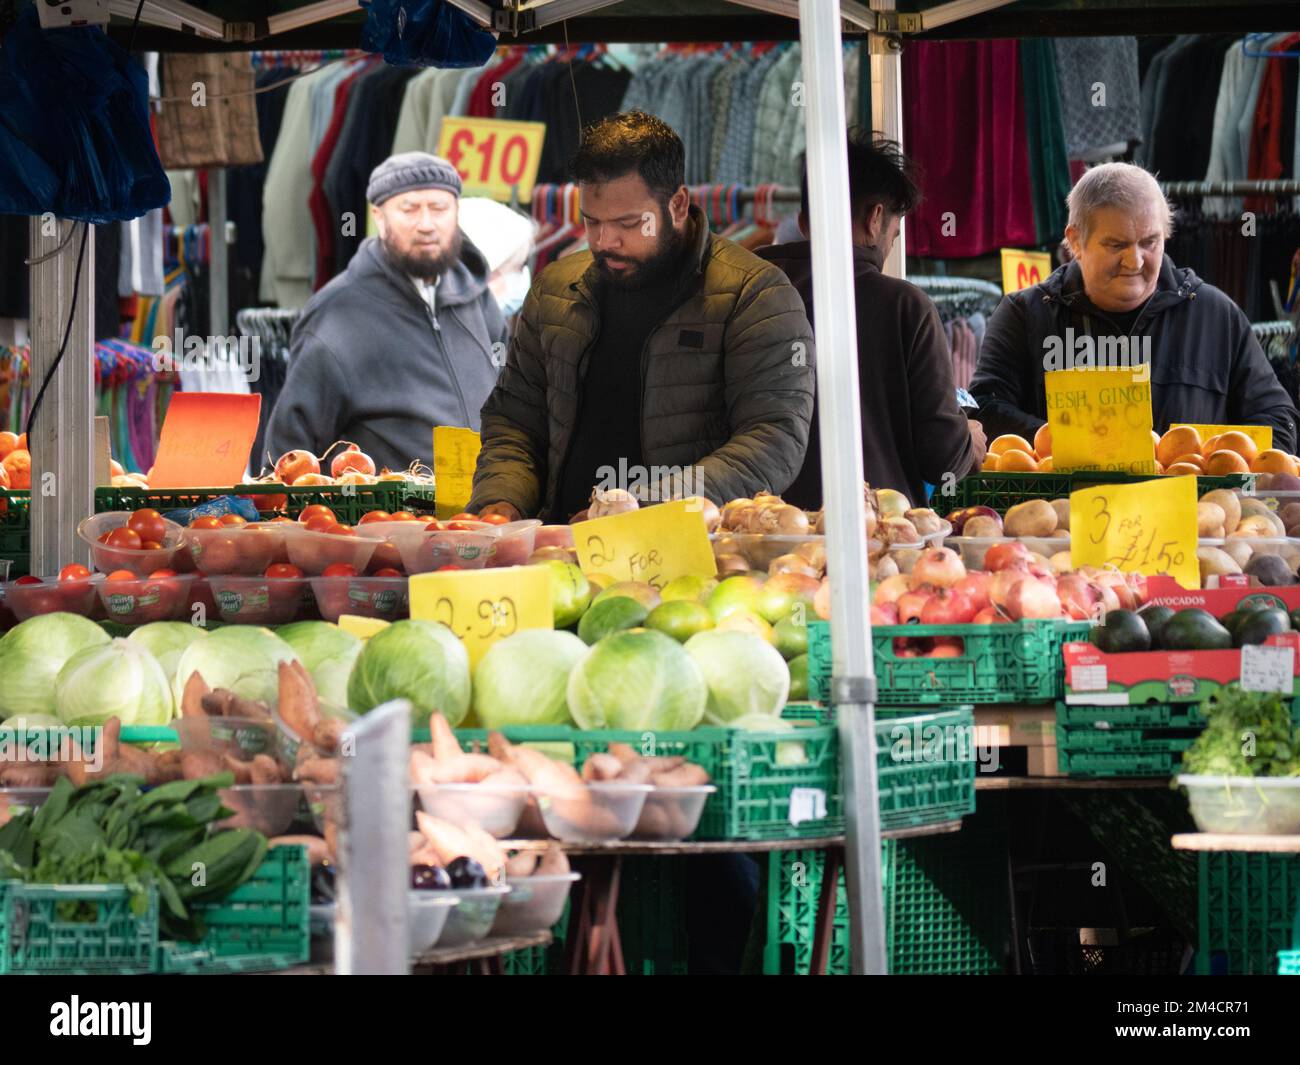 Greengrocer in Walthamstow market, London, UK, the longest outdoor market in Europe, with traders and market stall holders serving shoppers, with prices displayed in pounds sterling Stock Photo